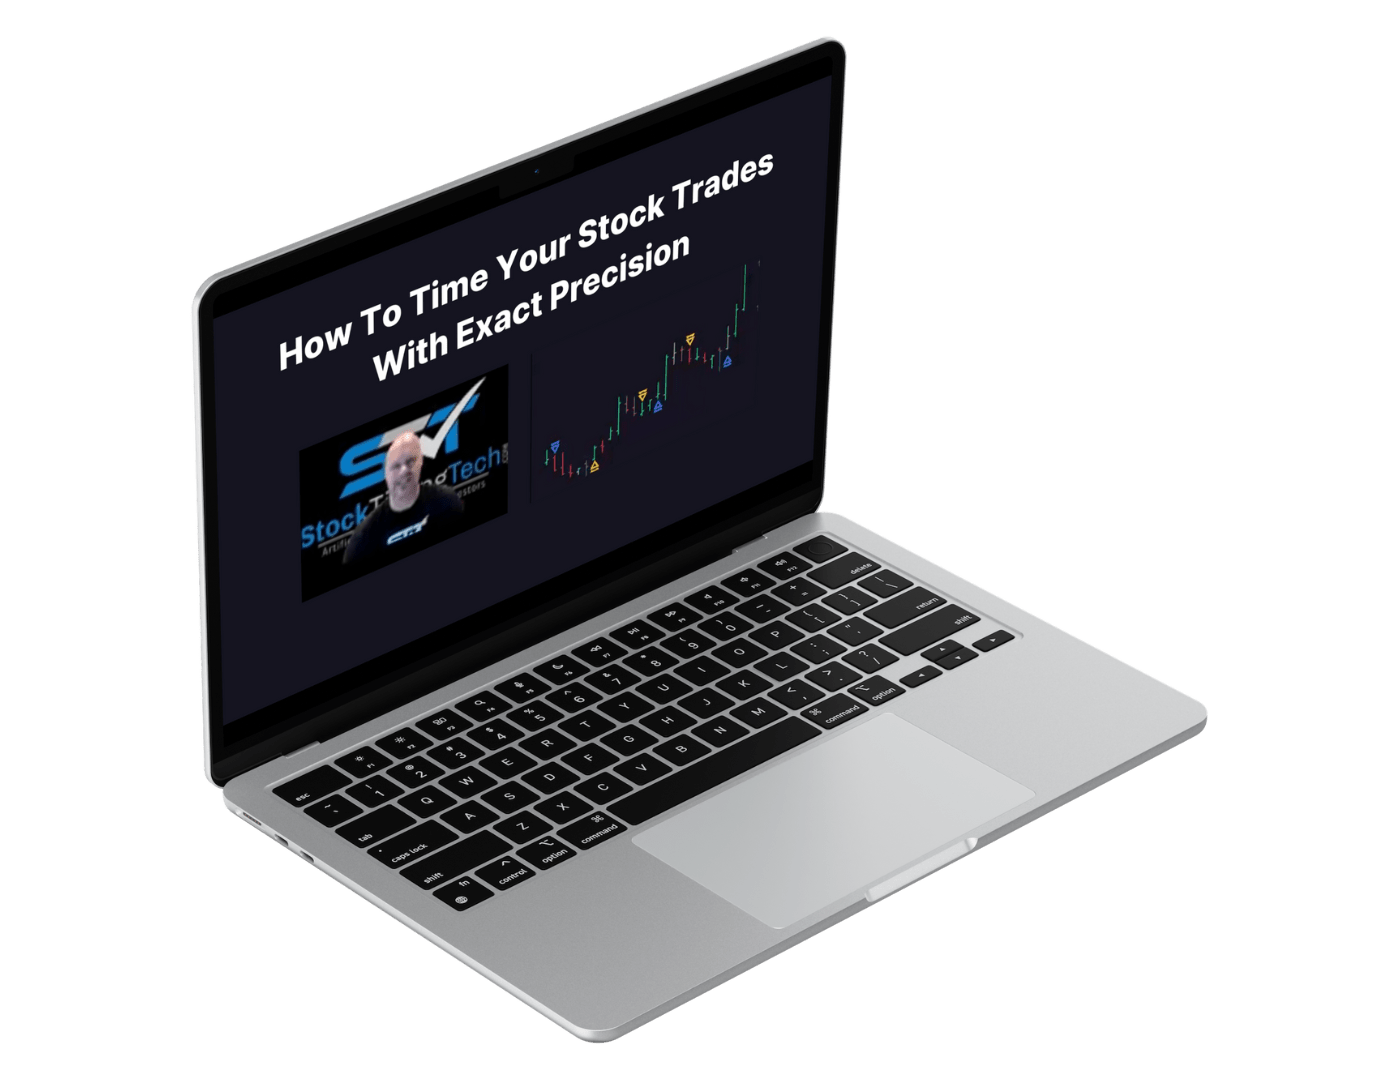 free-video-training-how-to-time-your-stock-trades-with-exact-precision